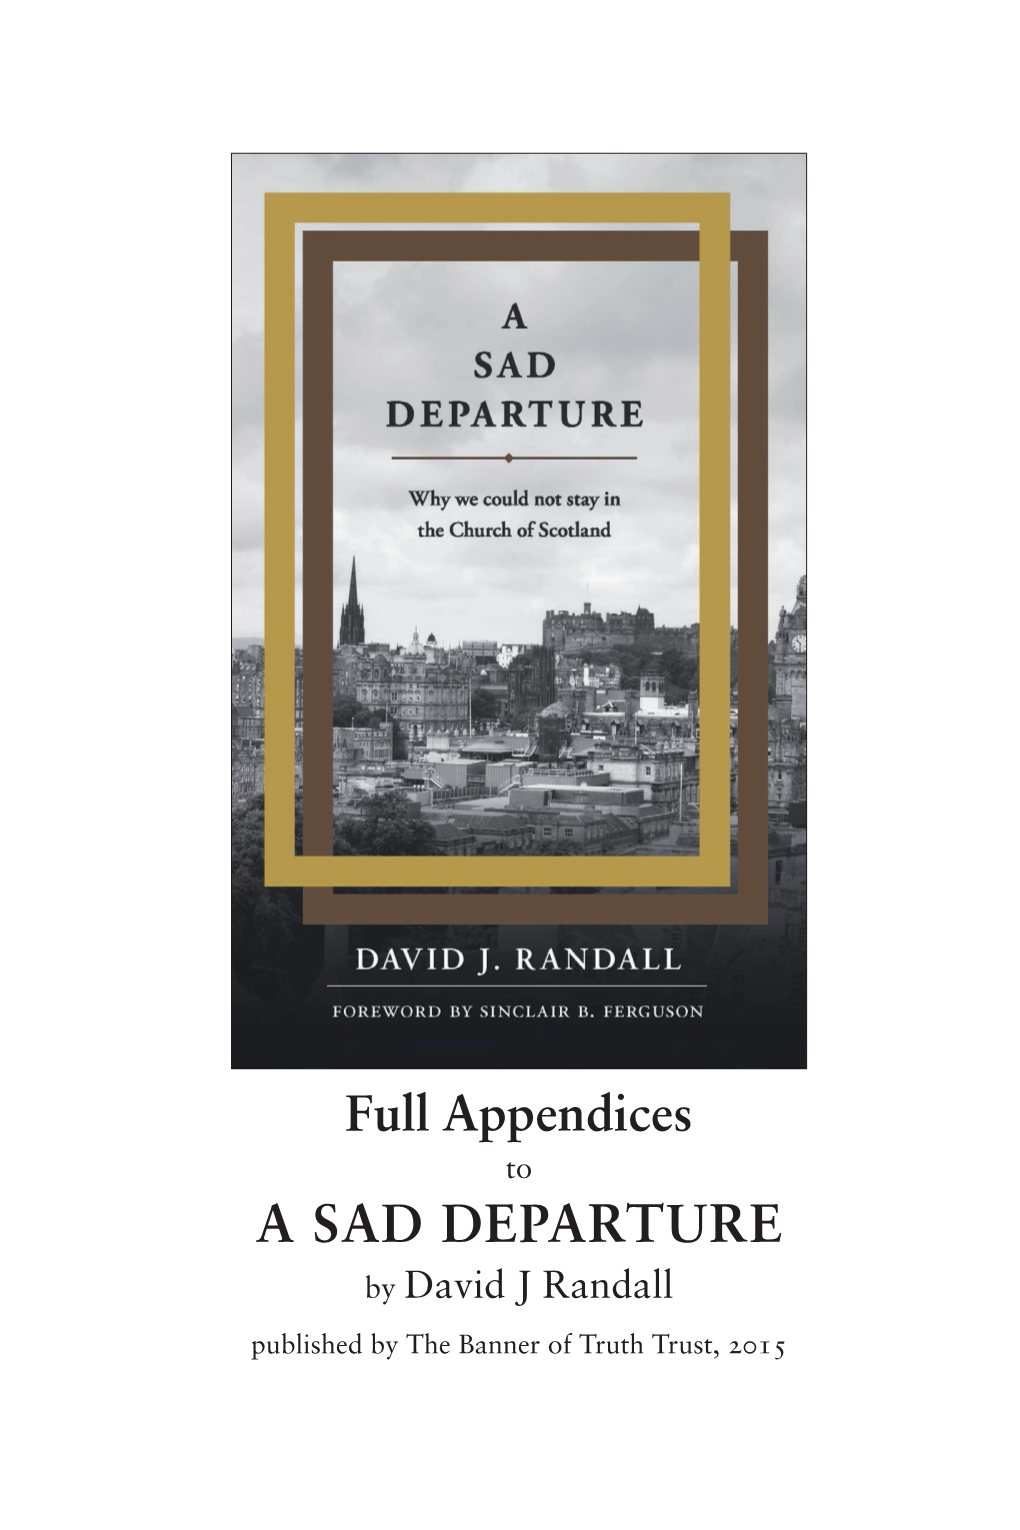 A SAD DEPARTURE by David J Randall Published by the Banner of Truth Trust, 2015